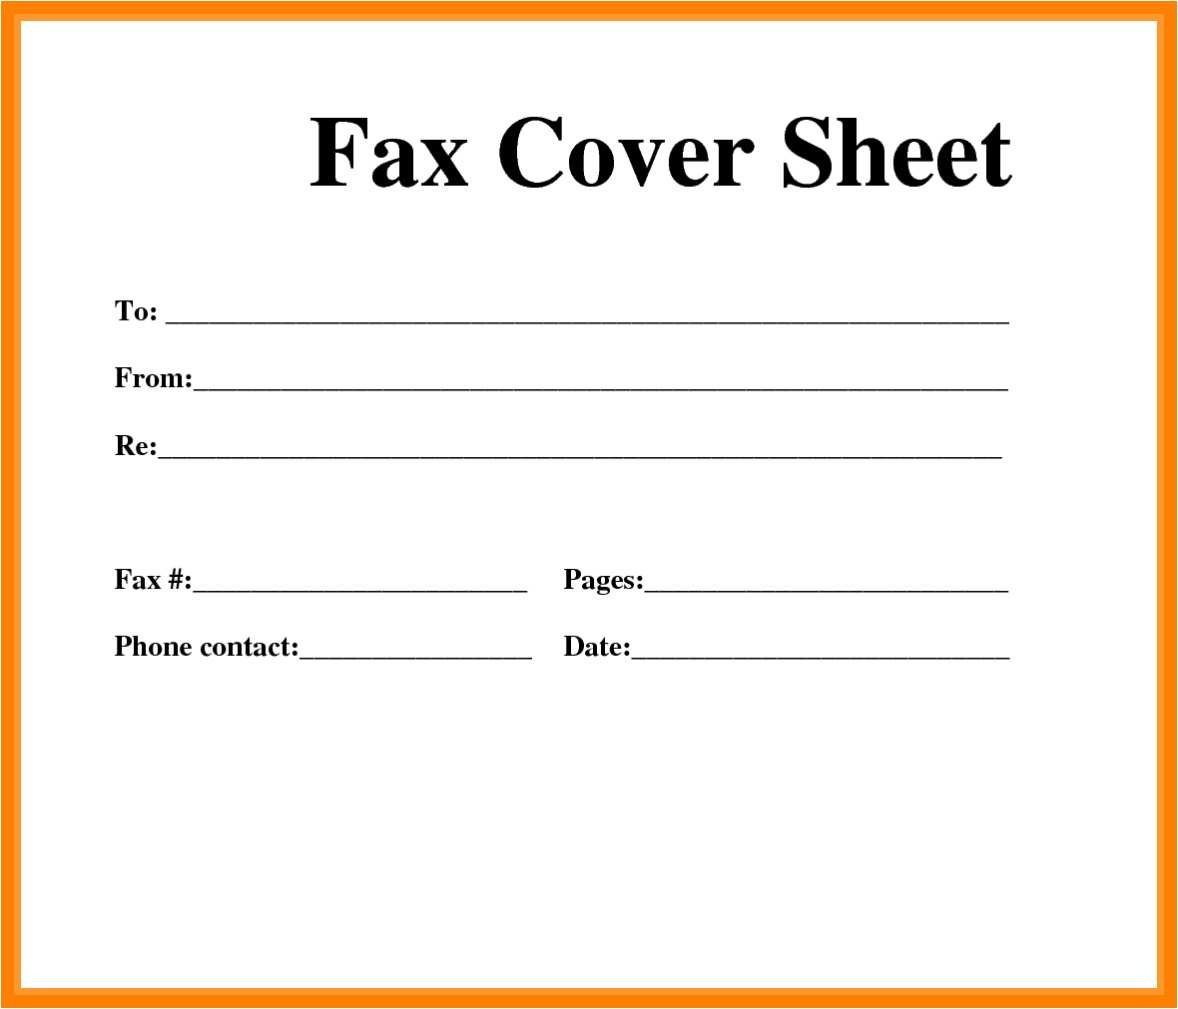 53 Fresh Fax Cover Sheet Template Word 2013 - All About Resume - Free Printable Fax Cover Sheet Pdf